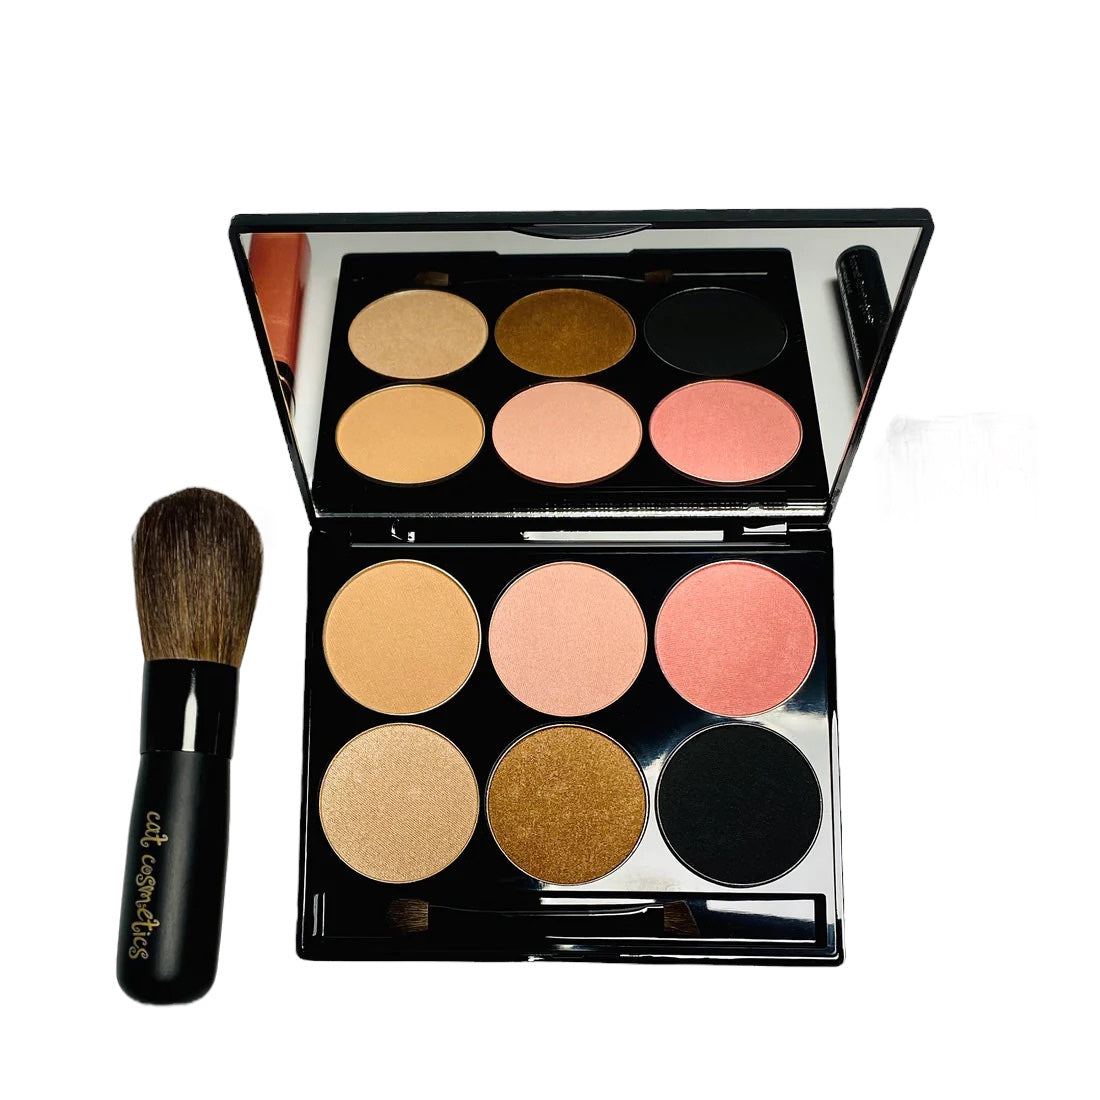 Miracle Working Kit - Kit and Brush Only (No Lip Gloss, No Pencil, just the Kit and Brushes